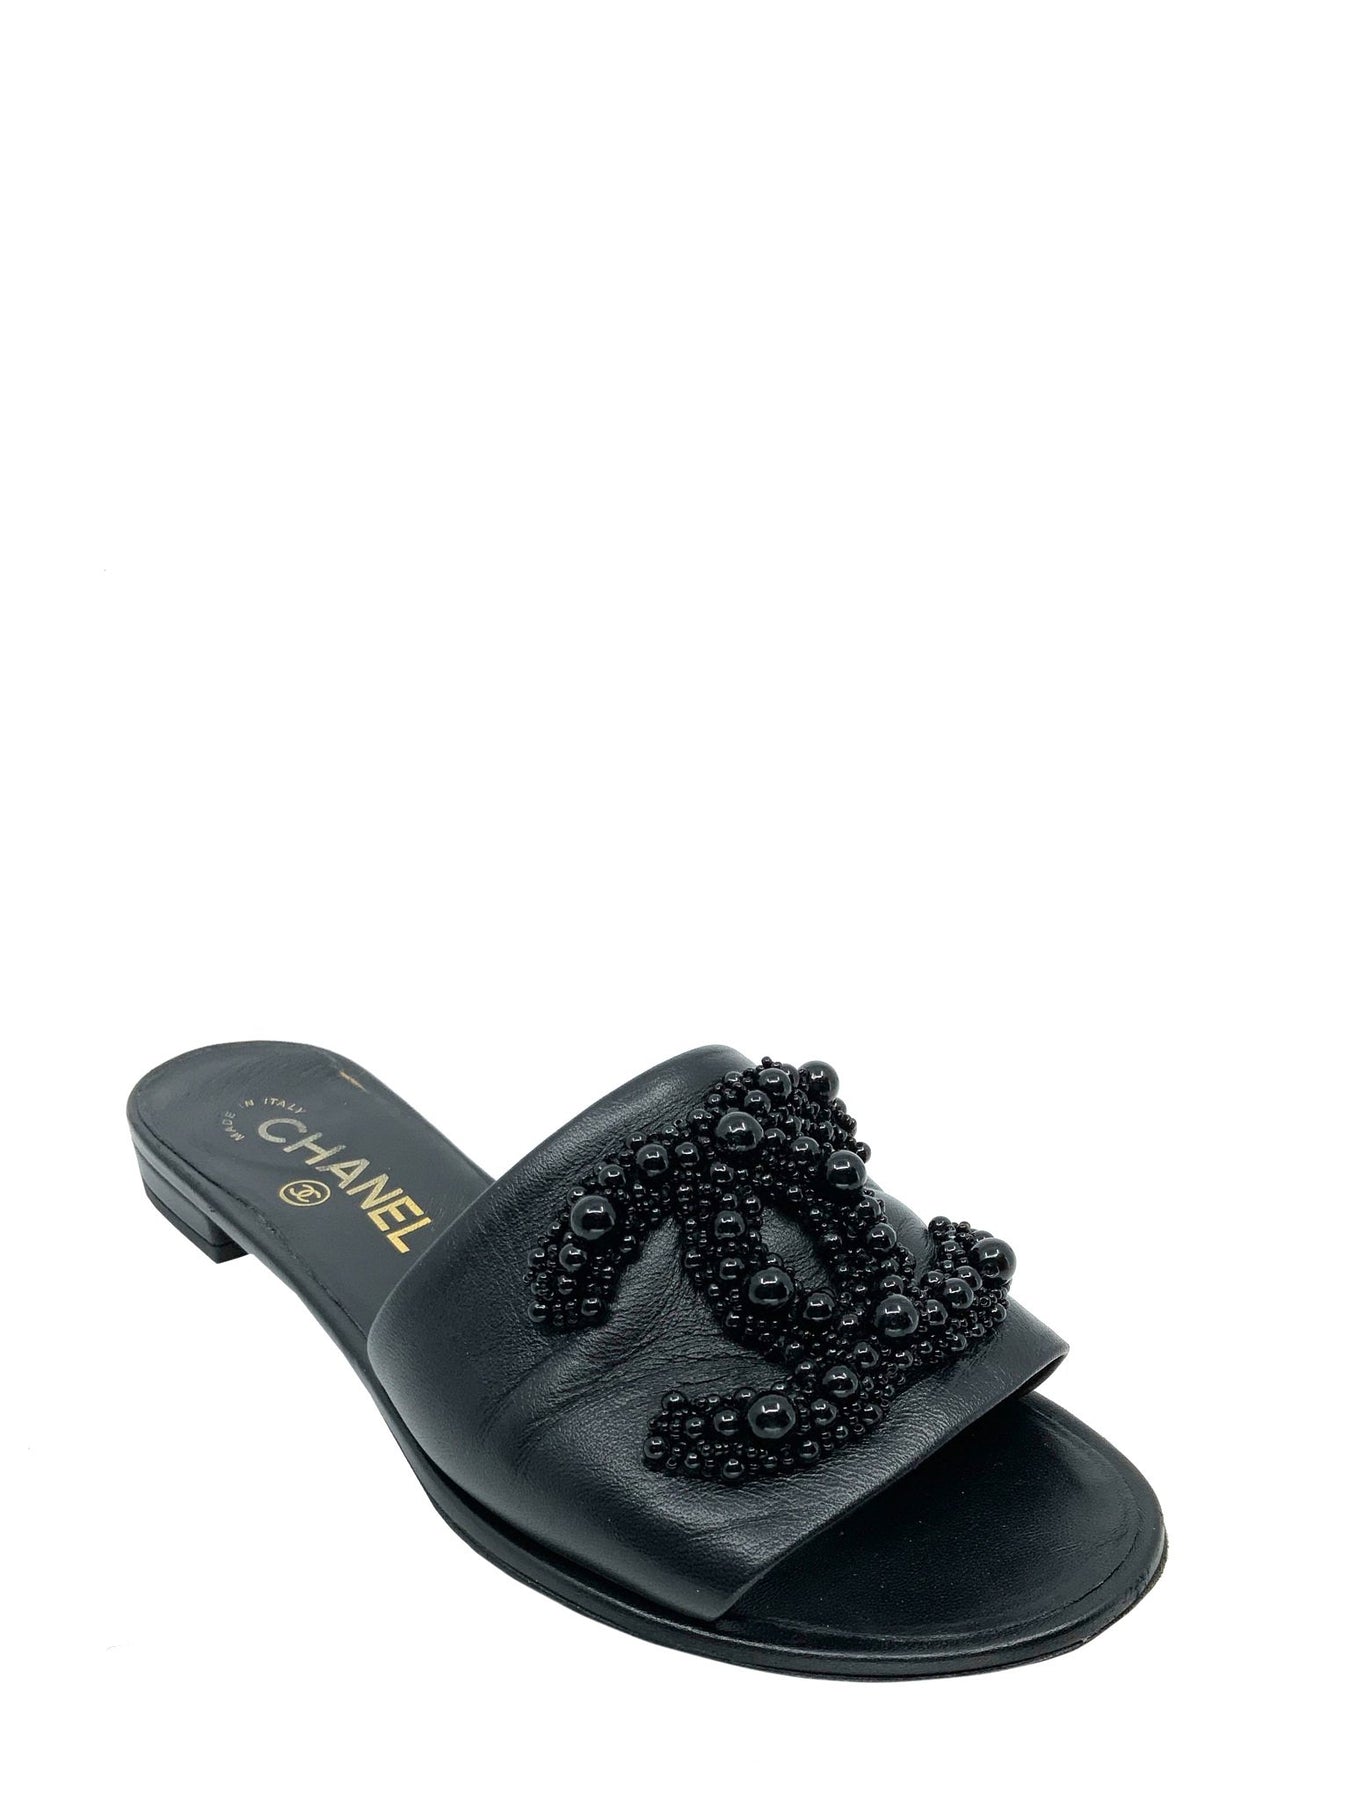 Chanel Black Leather Faux Pearl Slide Flat Sandals Size 39 Chanel